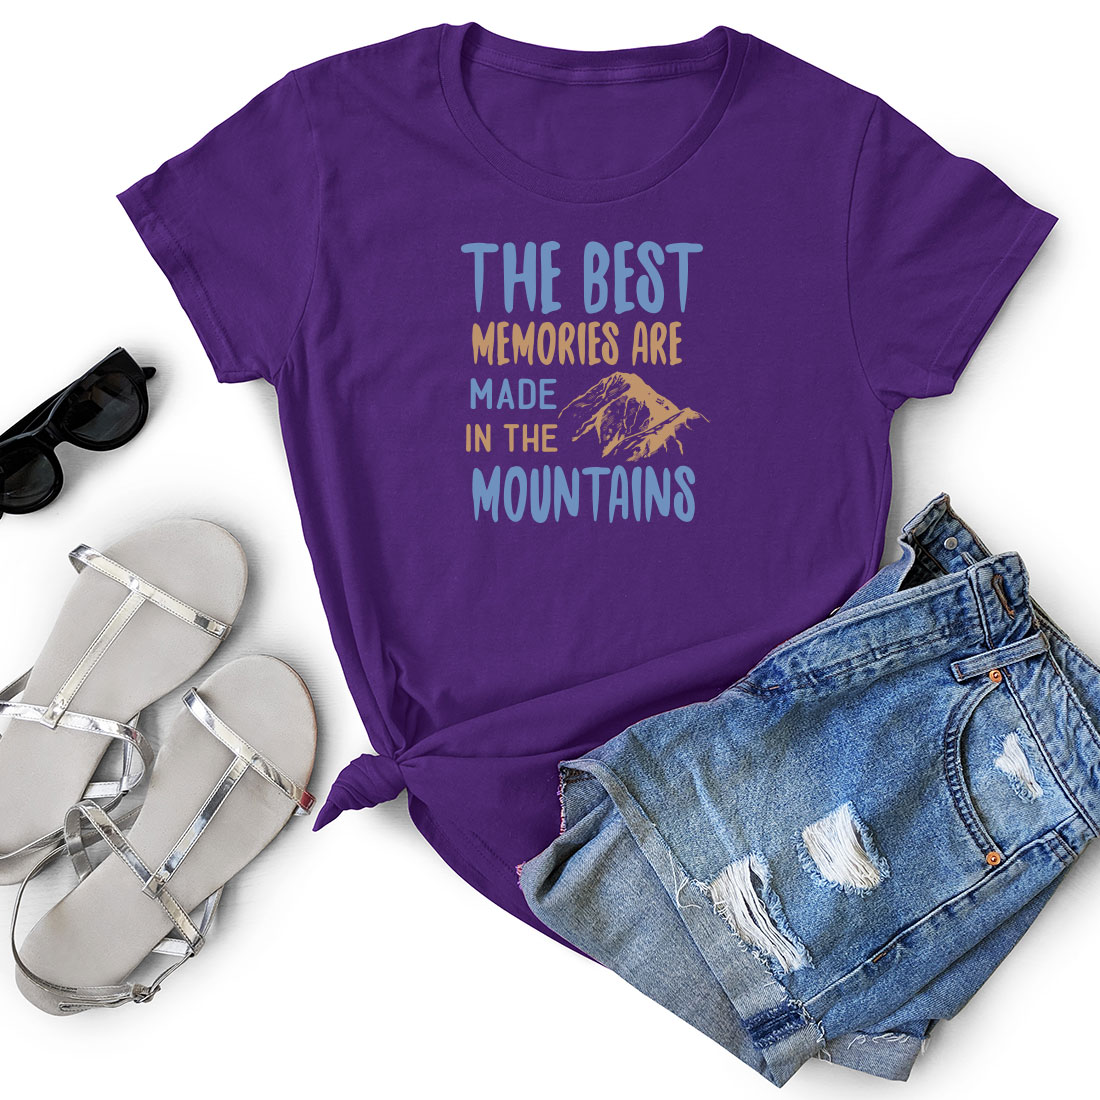 T - shirt that says the best memories are made in the mountains.